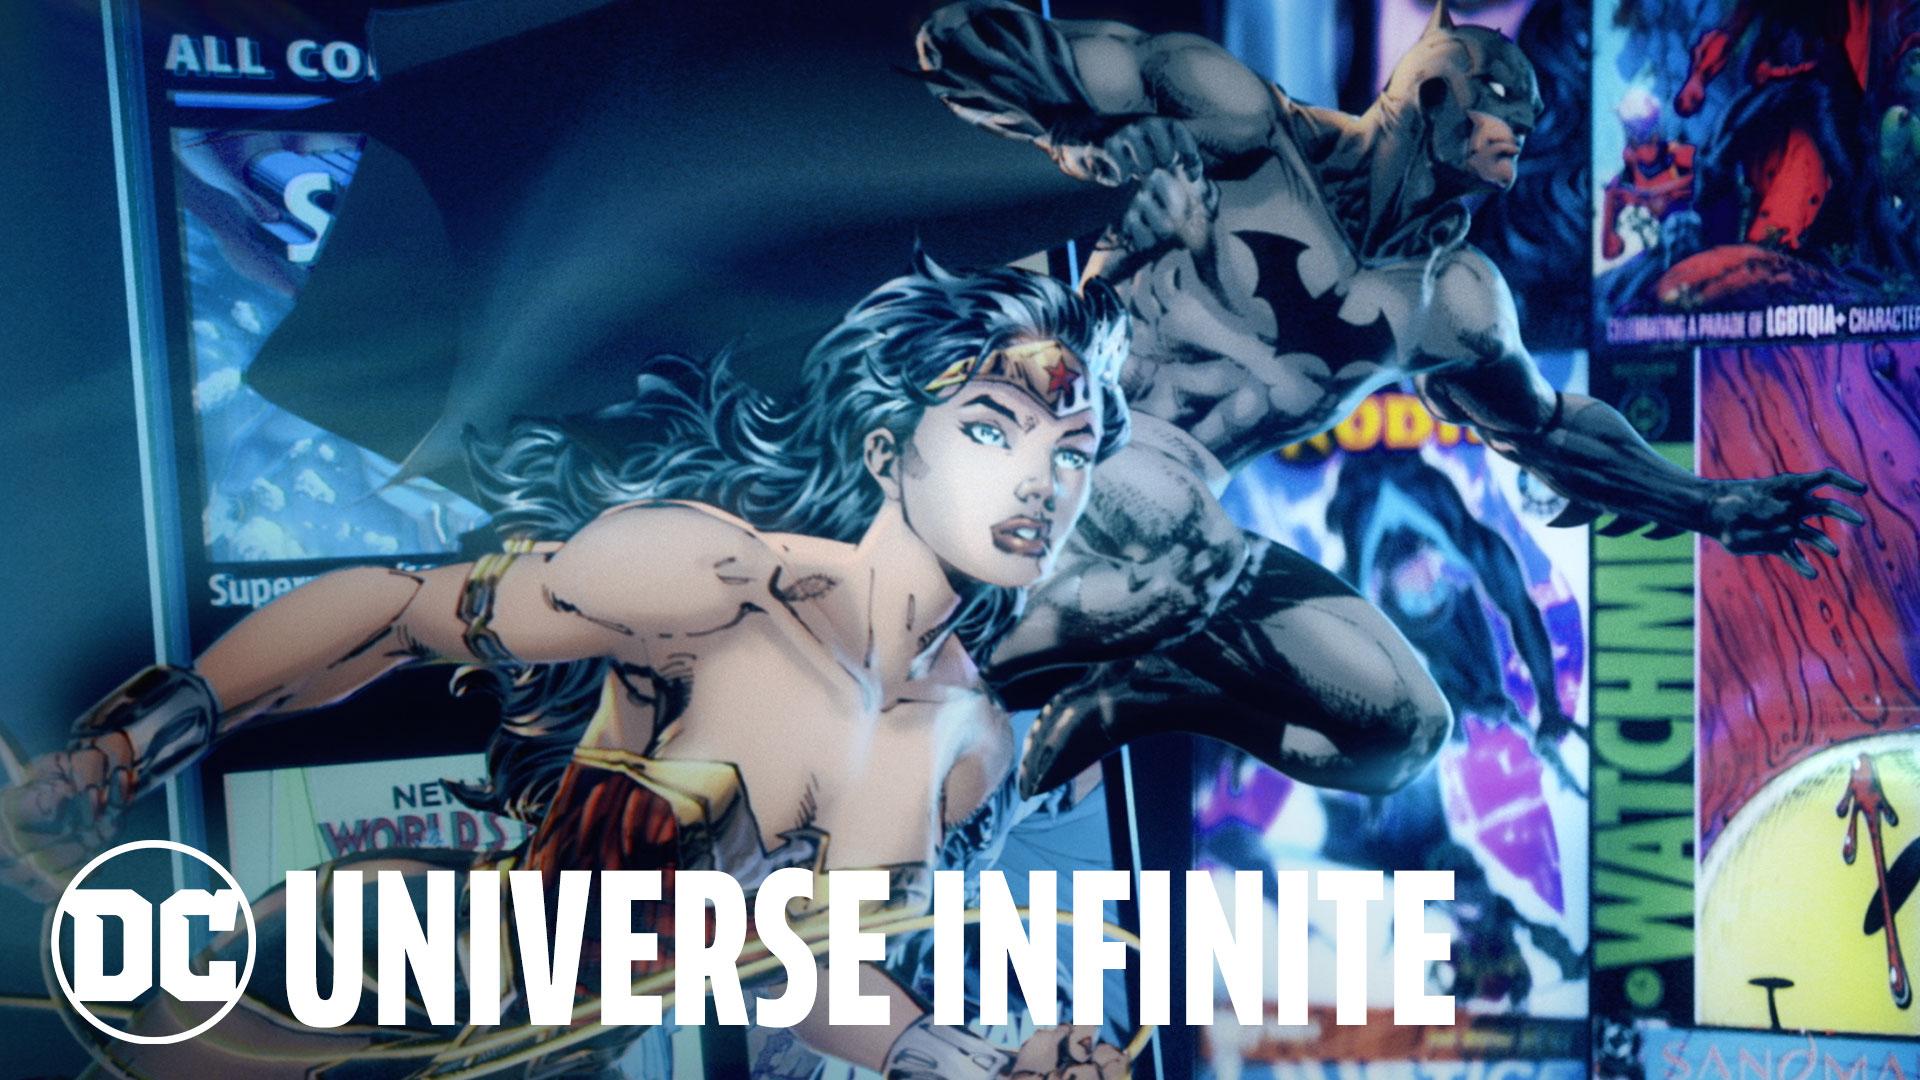 DC UNIVERSE INFINITE IS GOING GLOBAL – The Ultimate Digital Comic Book Subscription Service Is Live in Canada and Rolling Out in the United Kingdom, Australia, New Zealand, Brazil and Mexico.